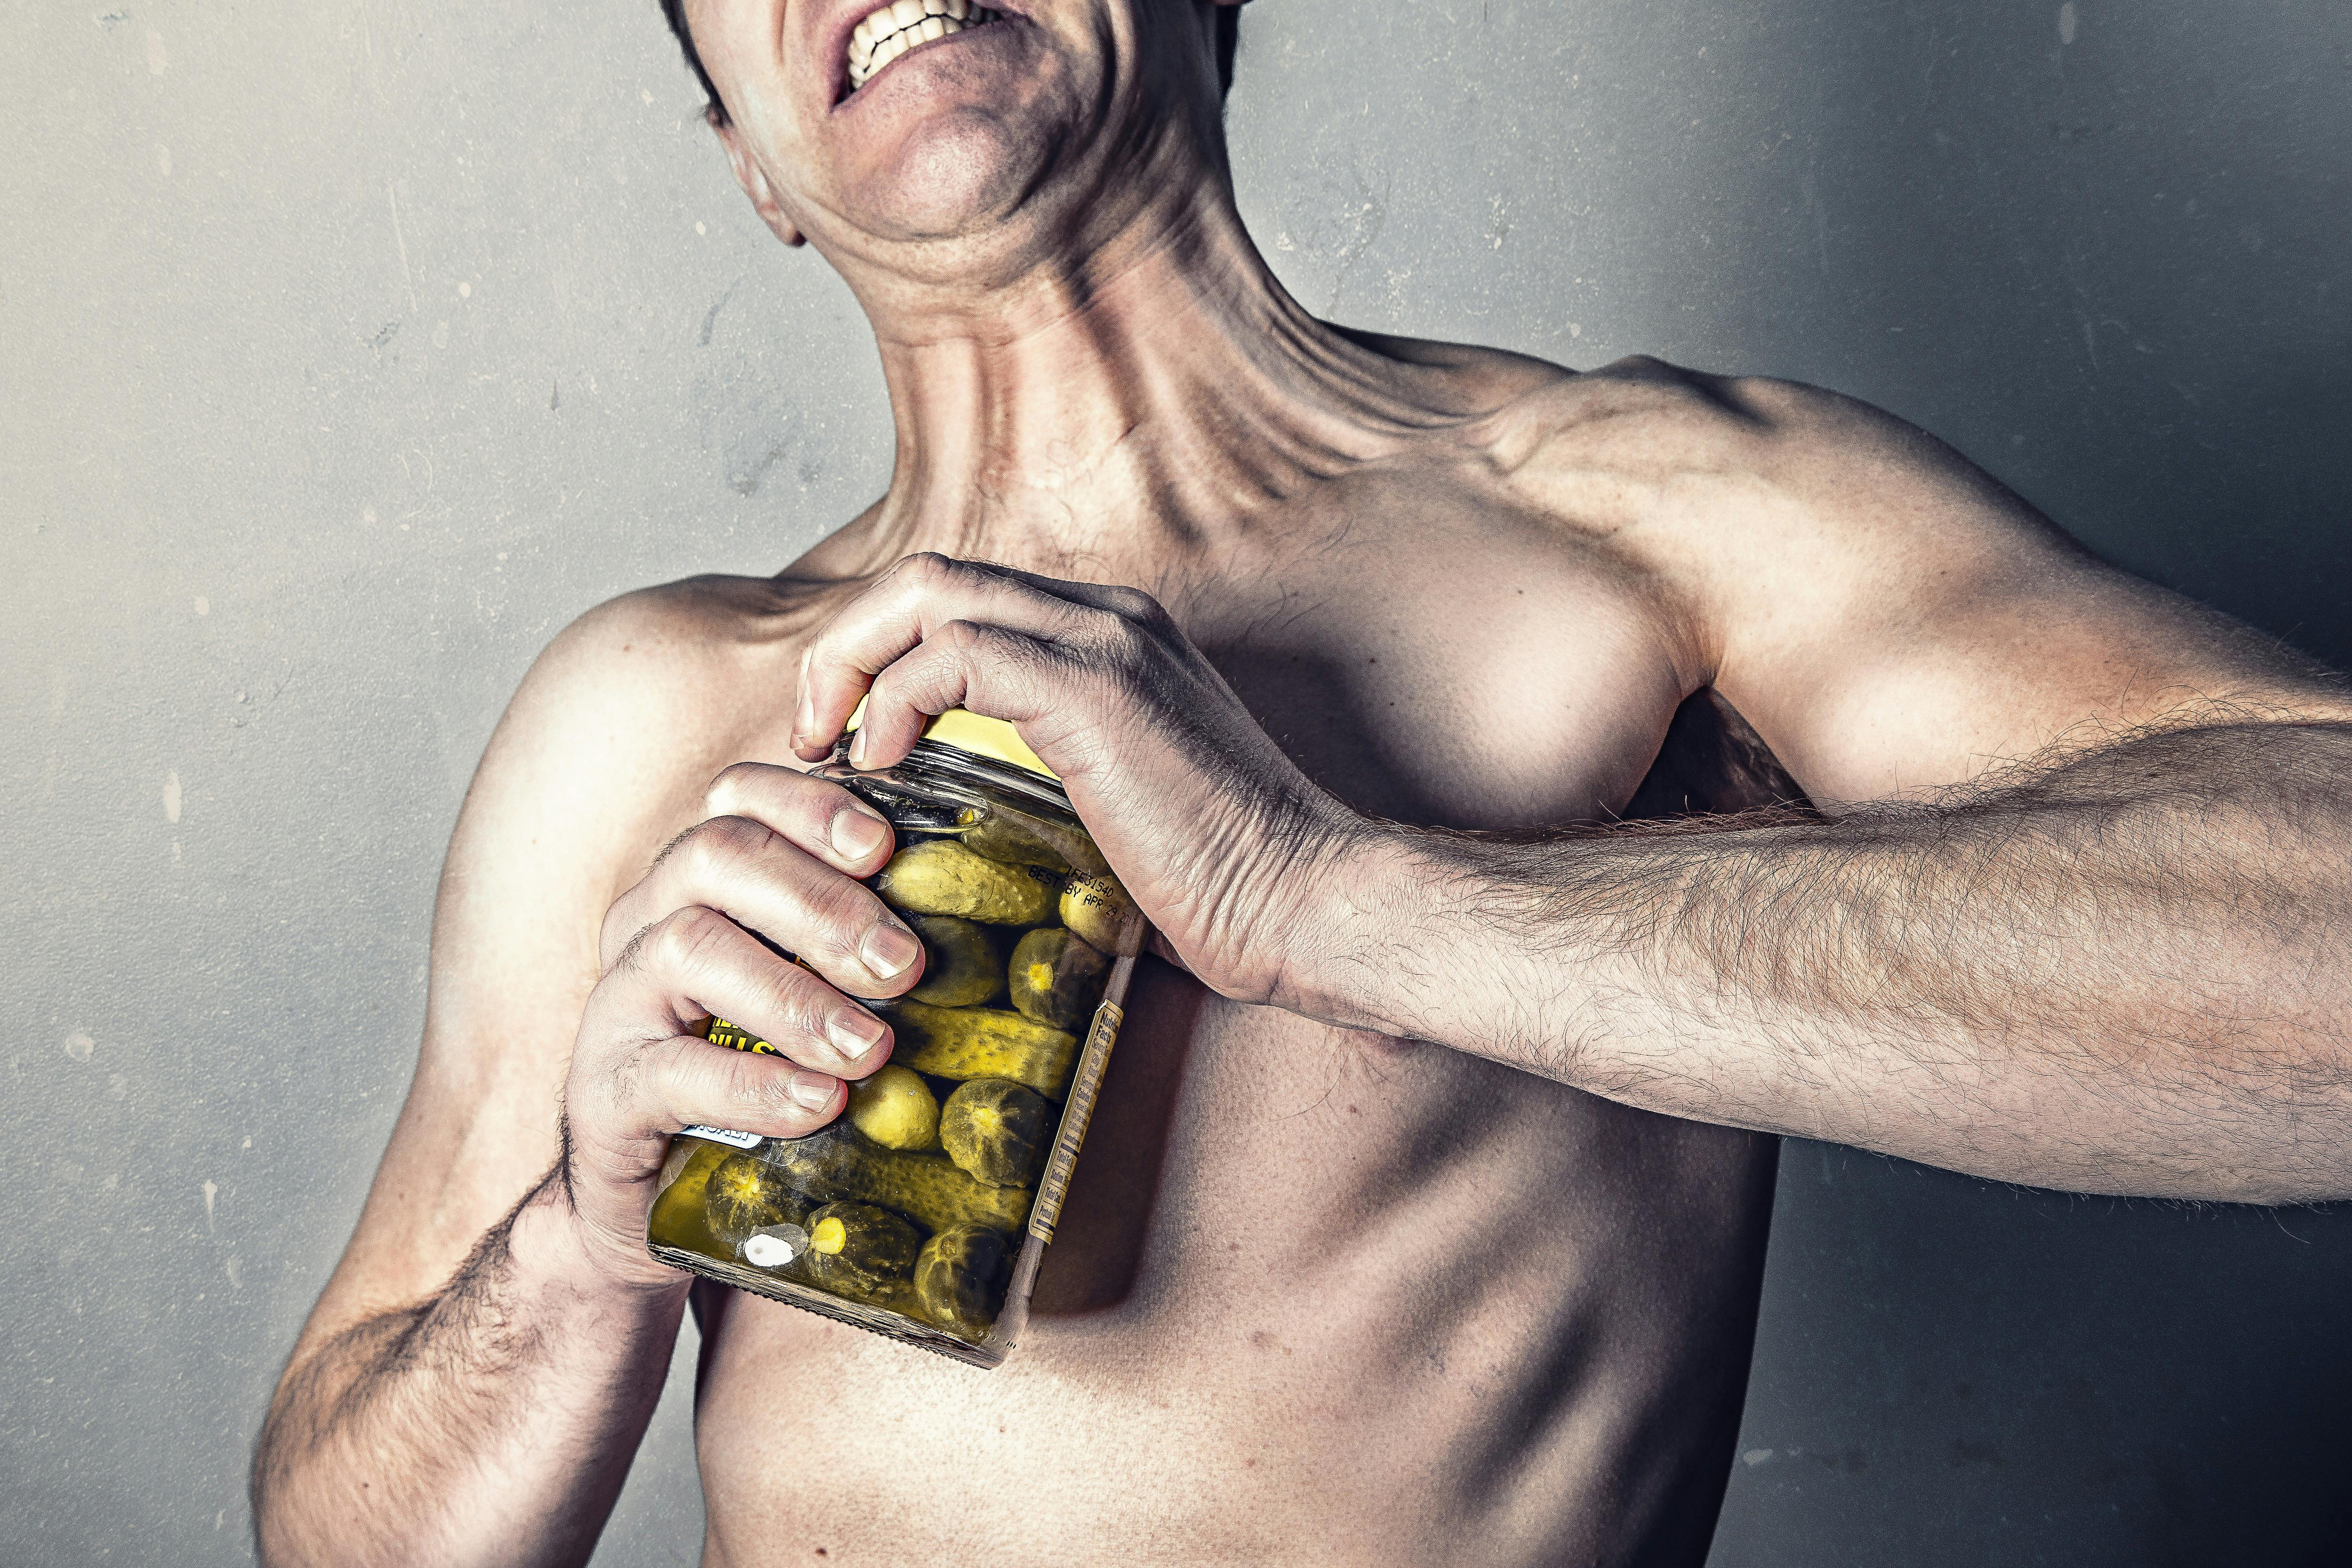 Shirtless man trying to open a jar of pickles.